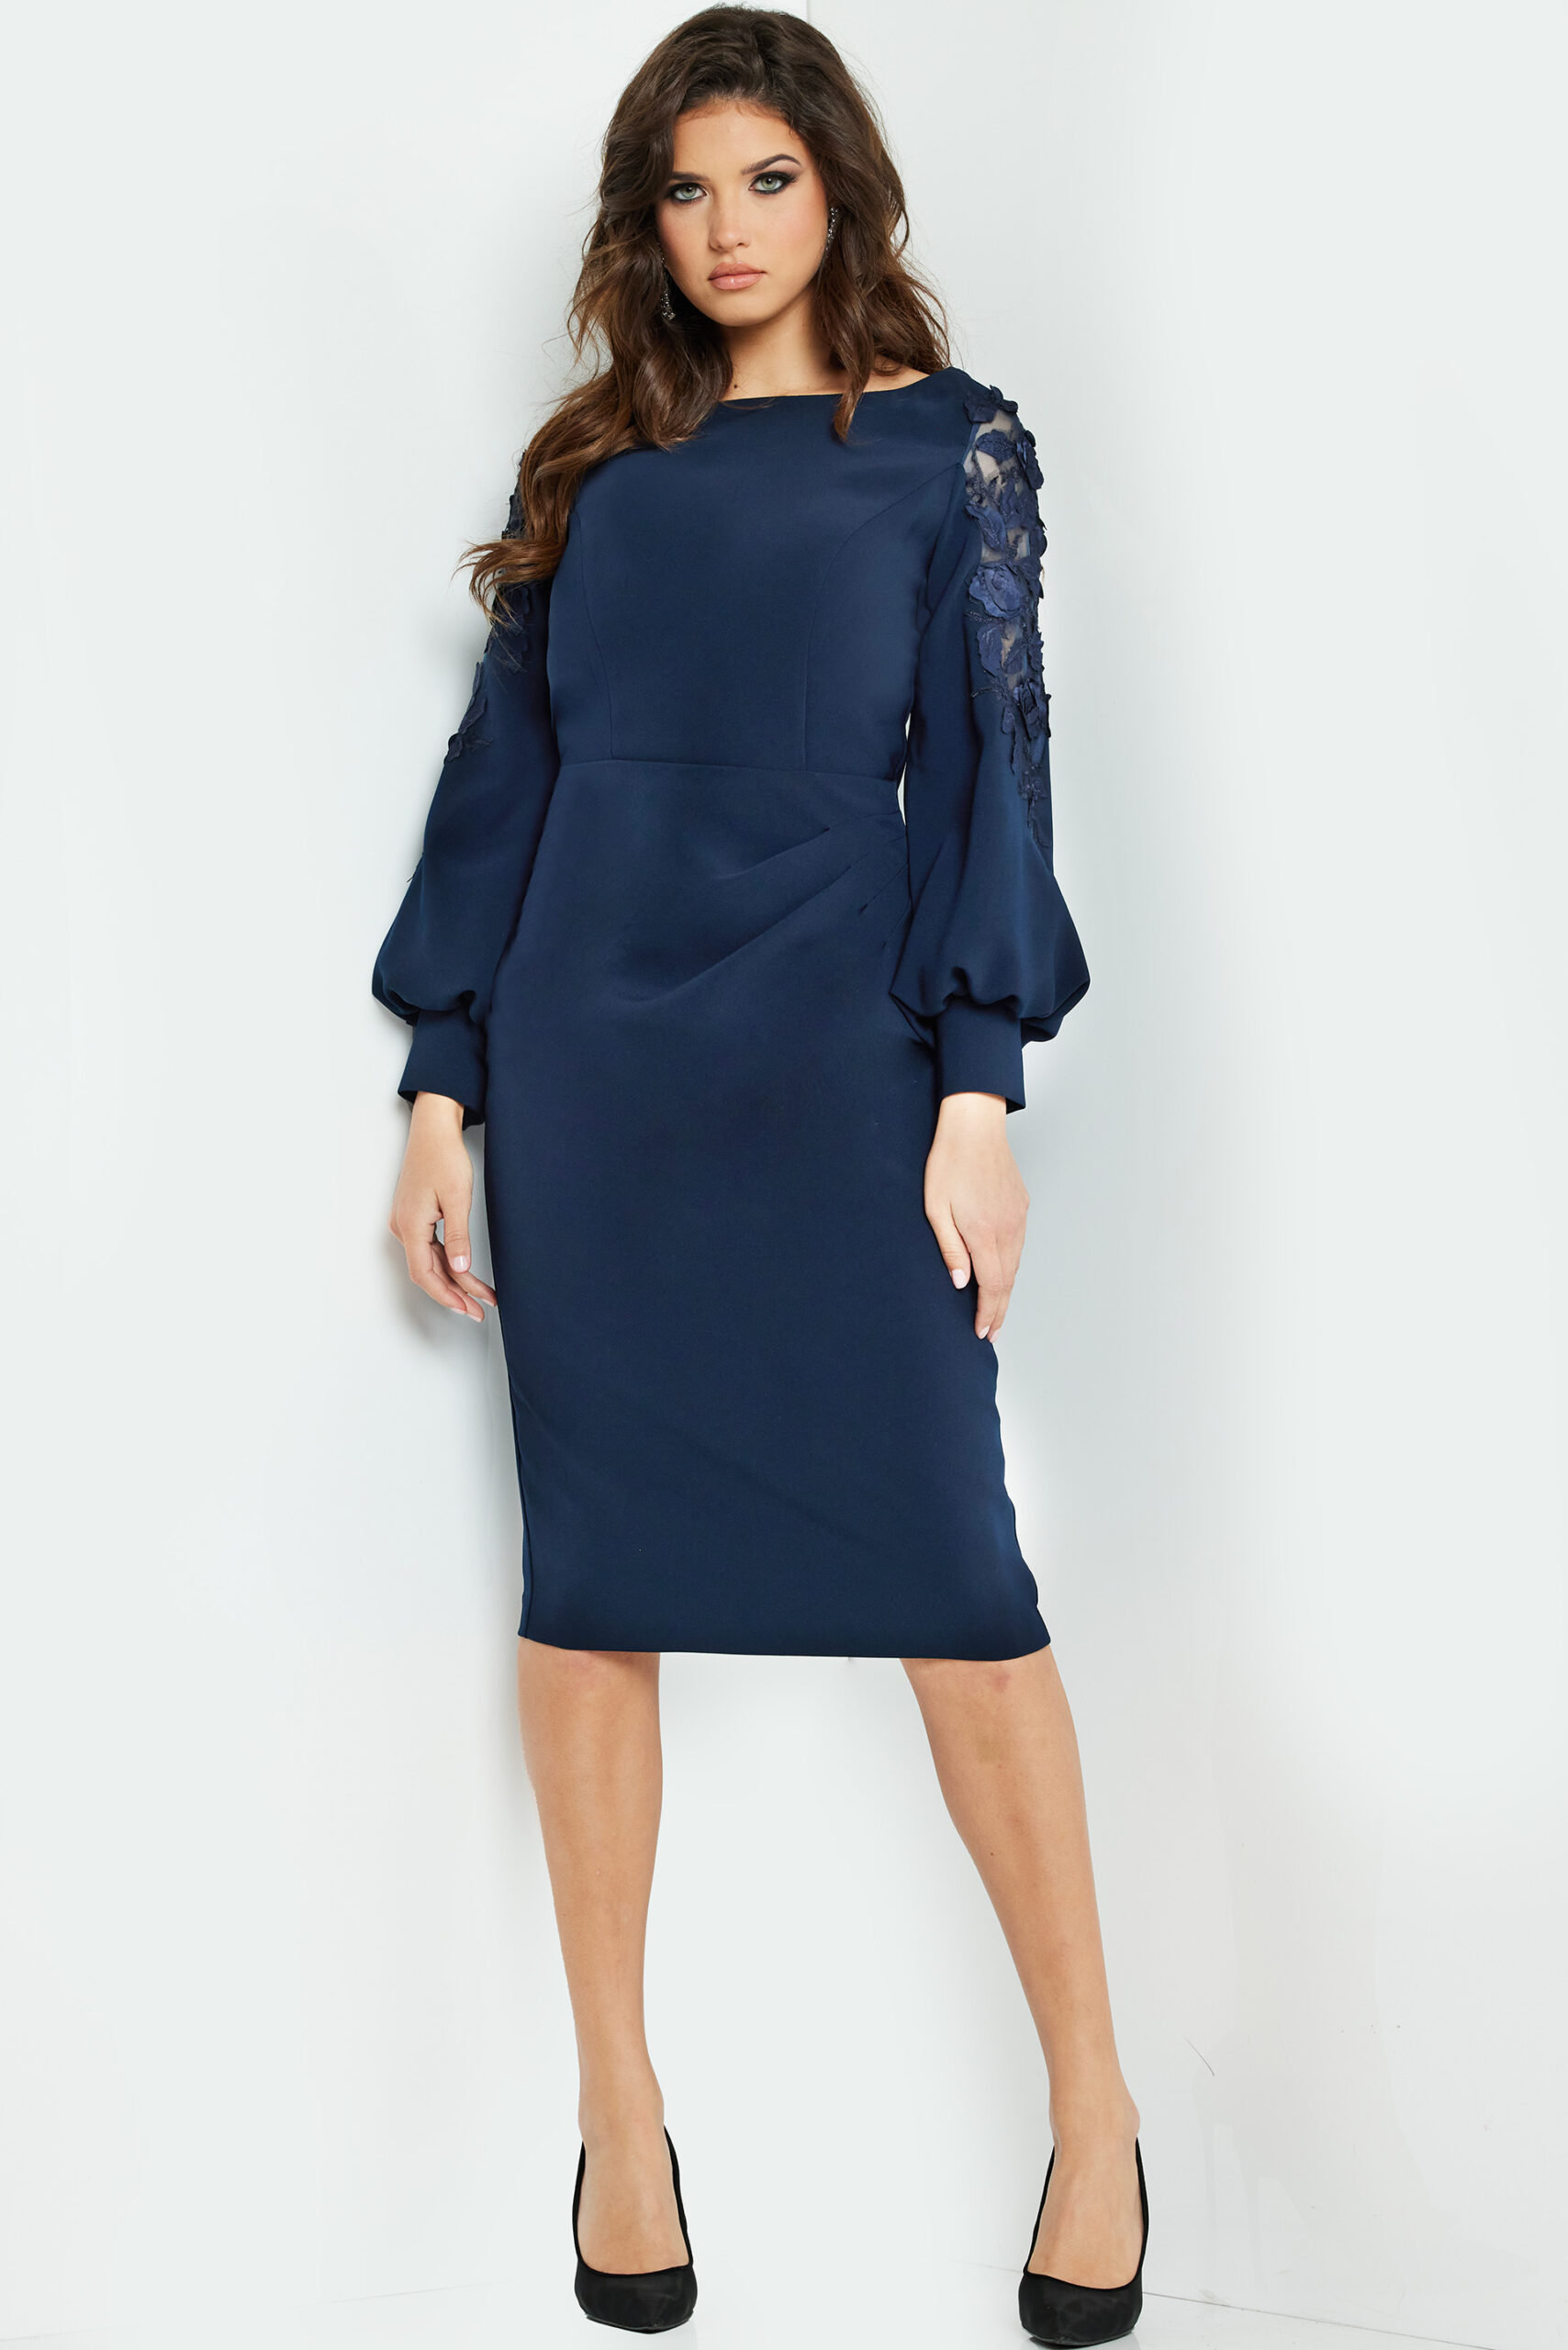 Navy Fitted Knee Length Ruched Dress